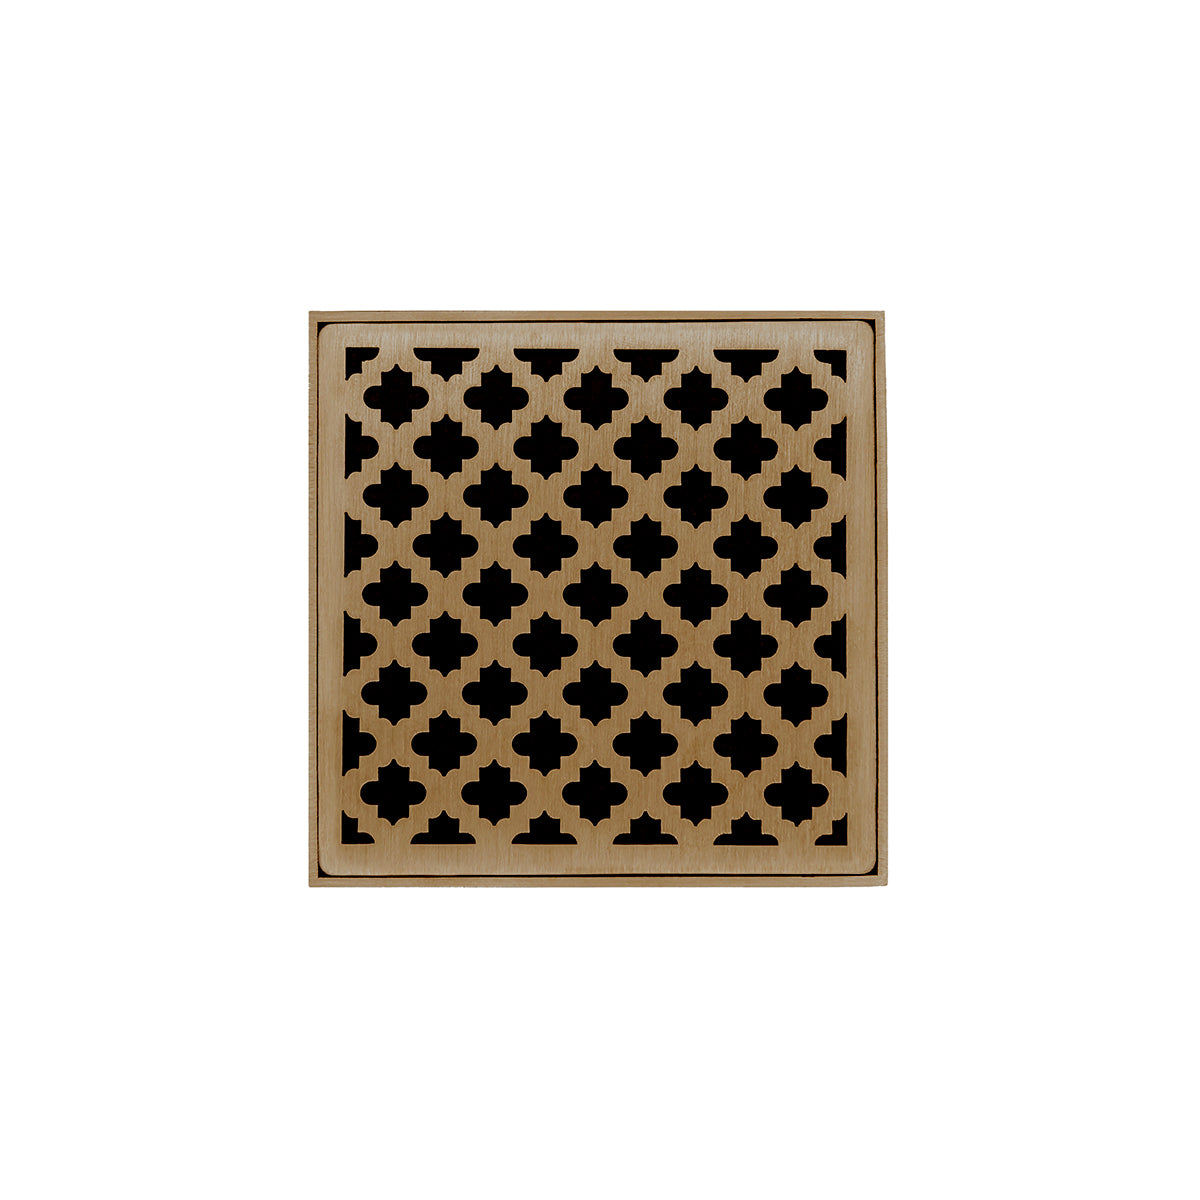 Infinity Drain 5" x 5" MD 5 Premium Center Drain Kit with Moor Pattern Decorative Plate with PVC Drain Body, 2" Outlet